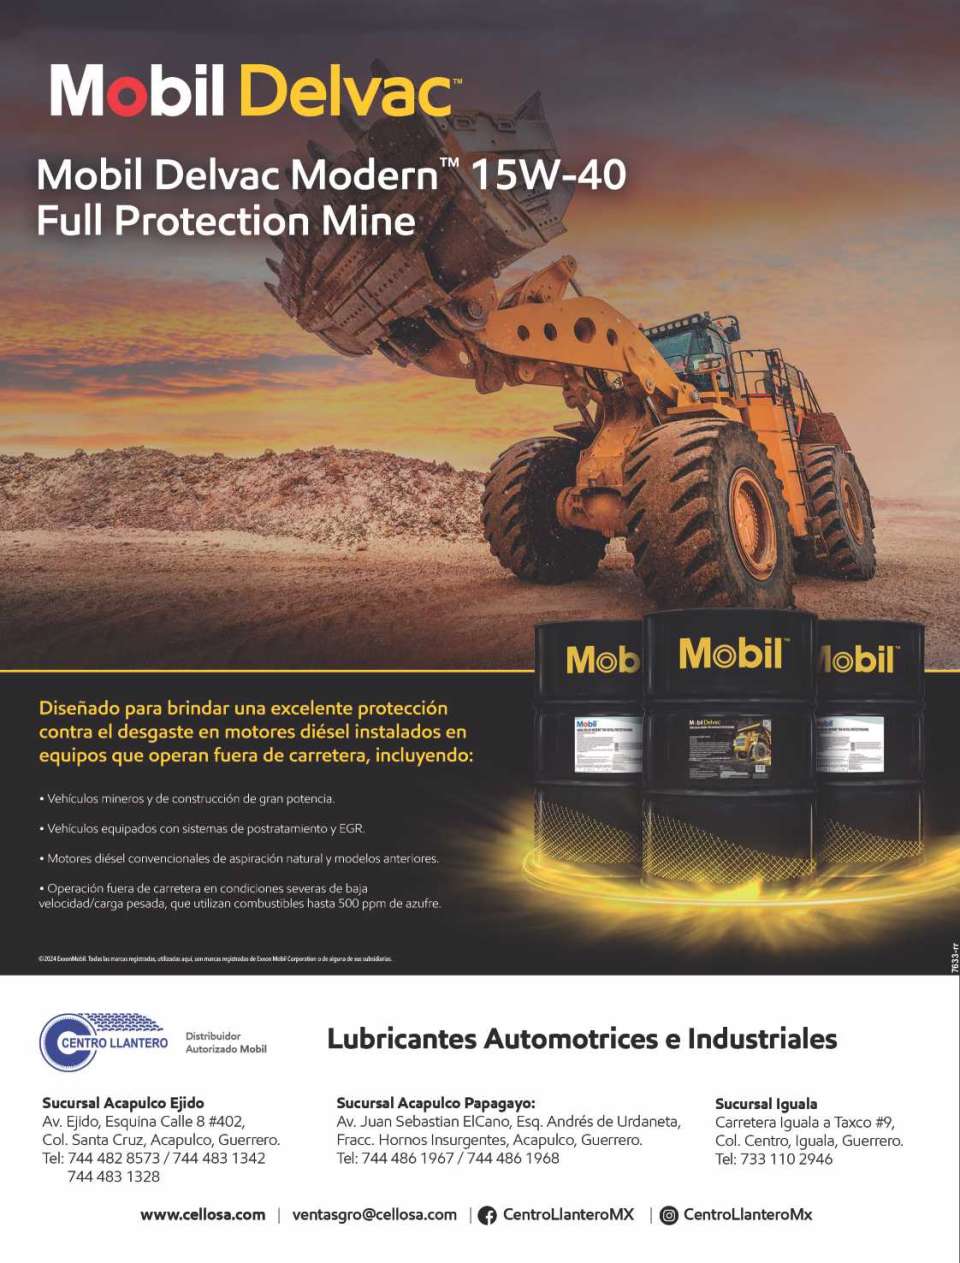 LUBRICANTS Mobil Delvac Modern 15W-40 Full Protection Mine. Designed to provide excellent protection against wear in diesel engines installed in equipment that operates off-highway.